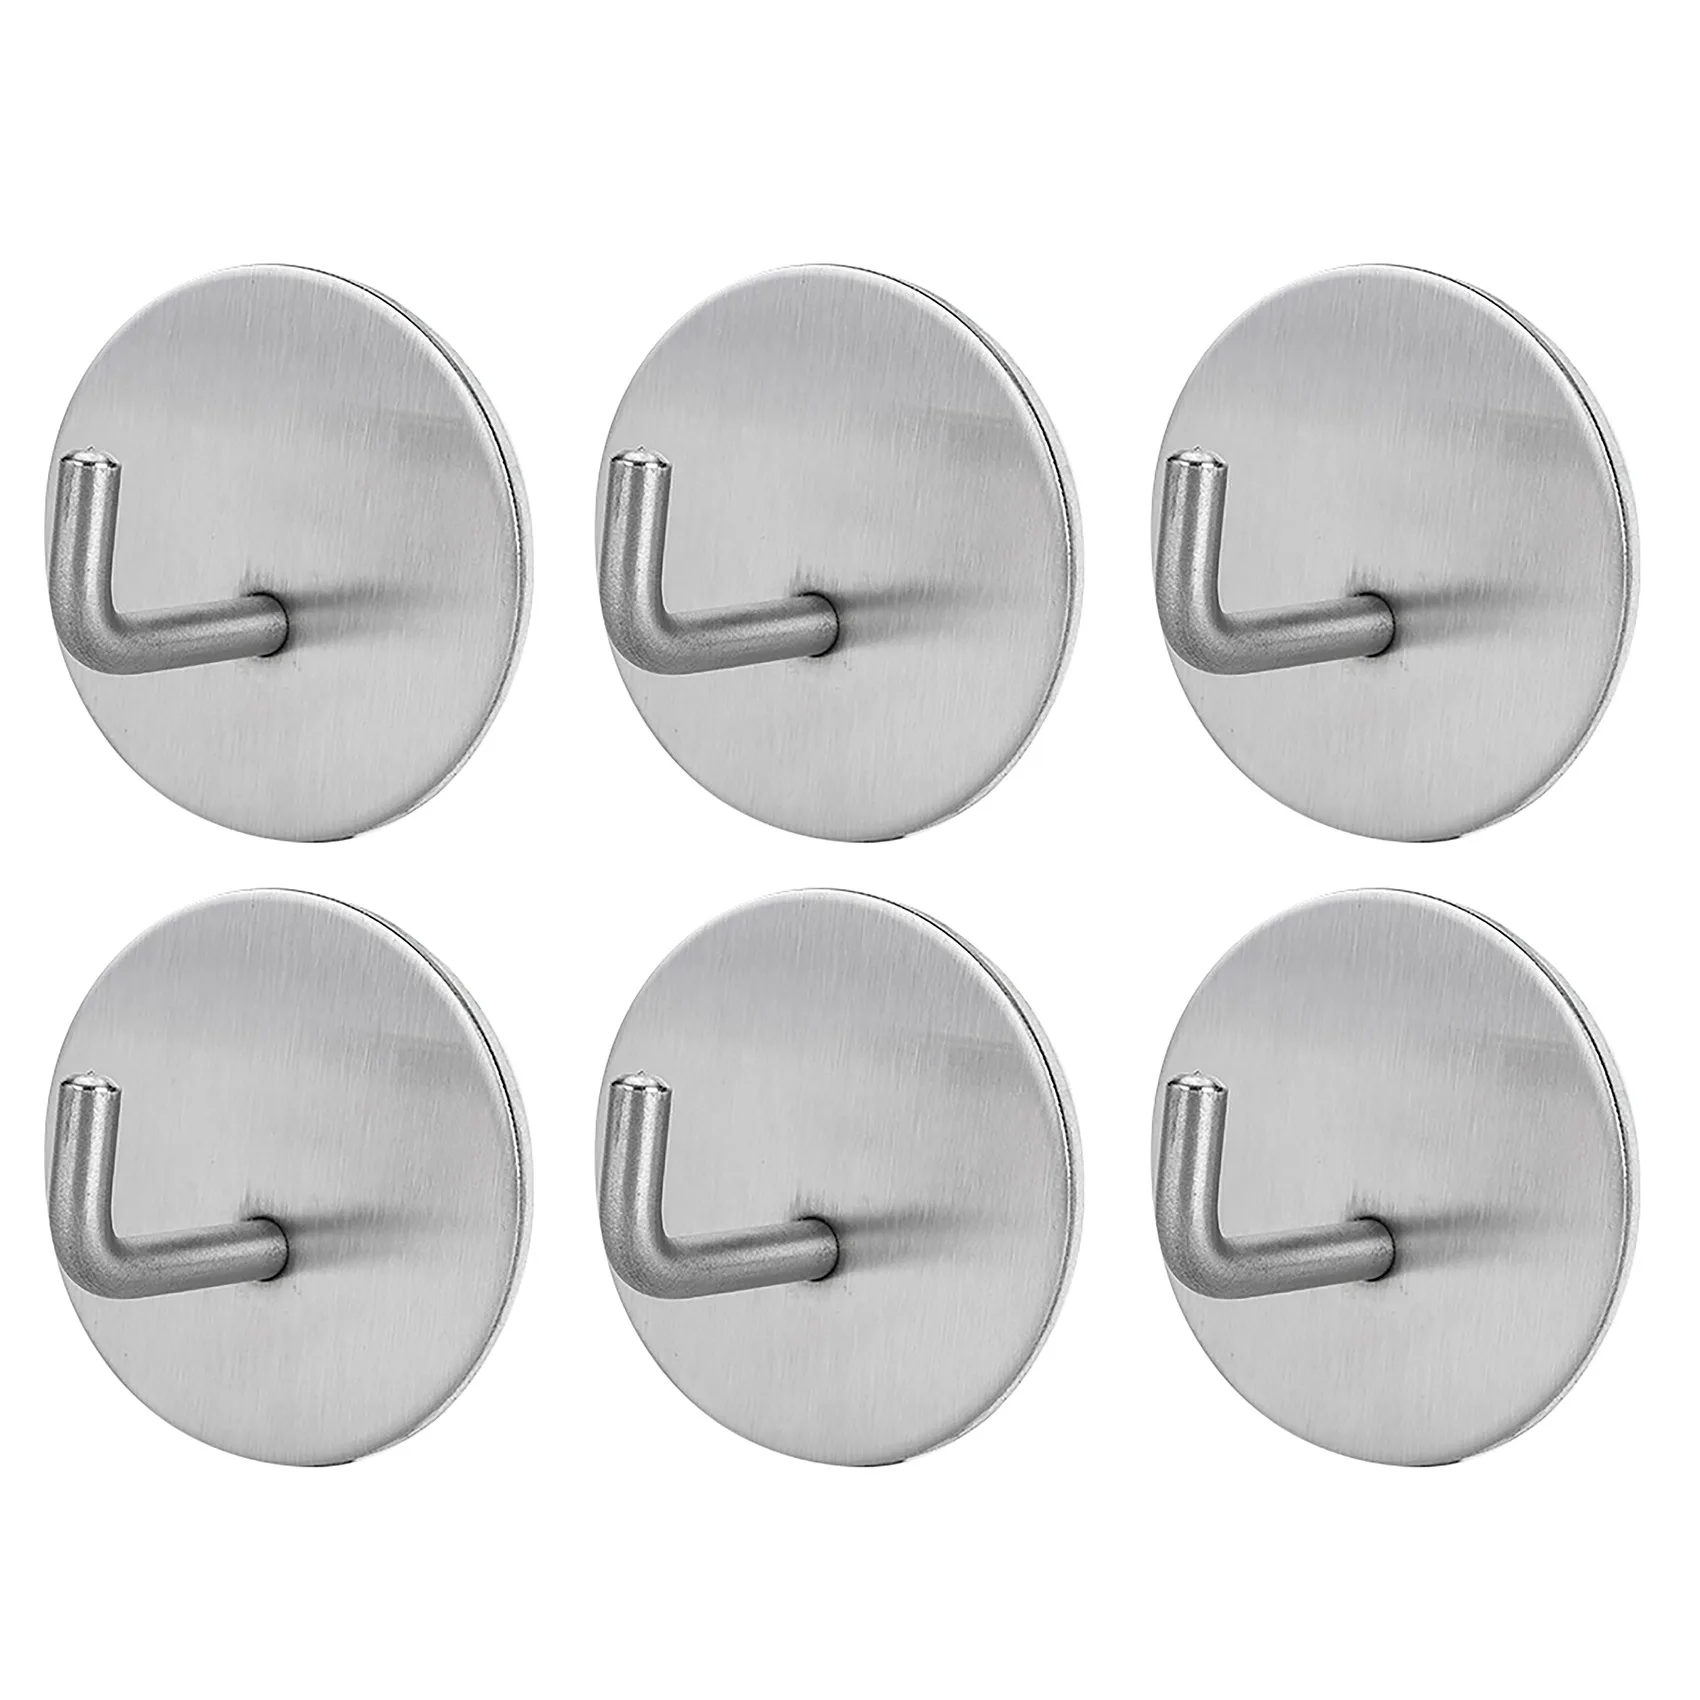 

6Pc Self-Adhesive Towel Hooks Without Drilling Stainless Steel Wall Hooks Towel Holder Door Hooks for Home Kitchen